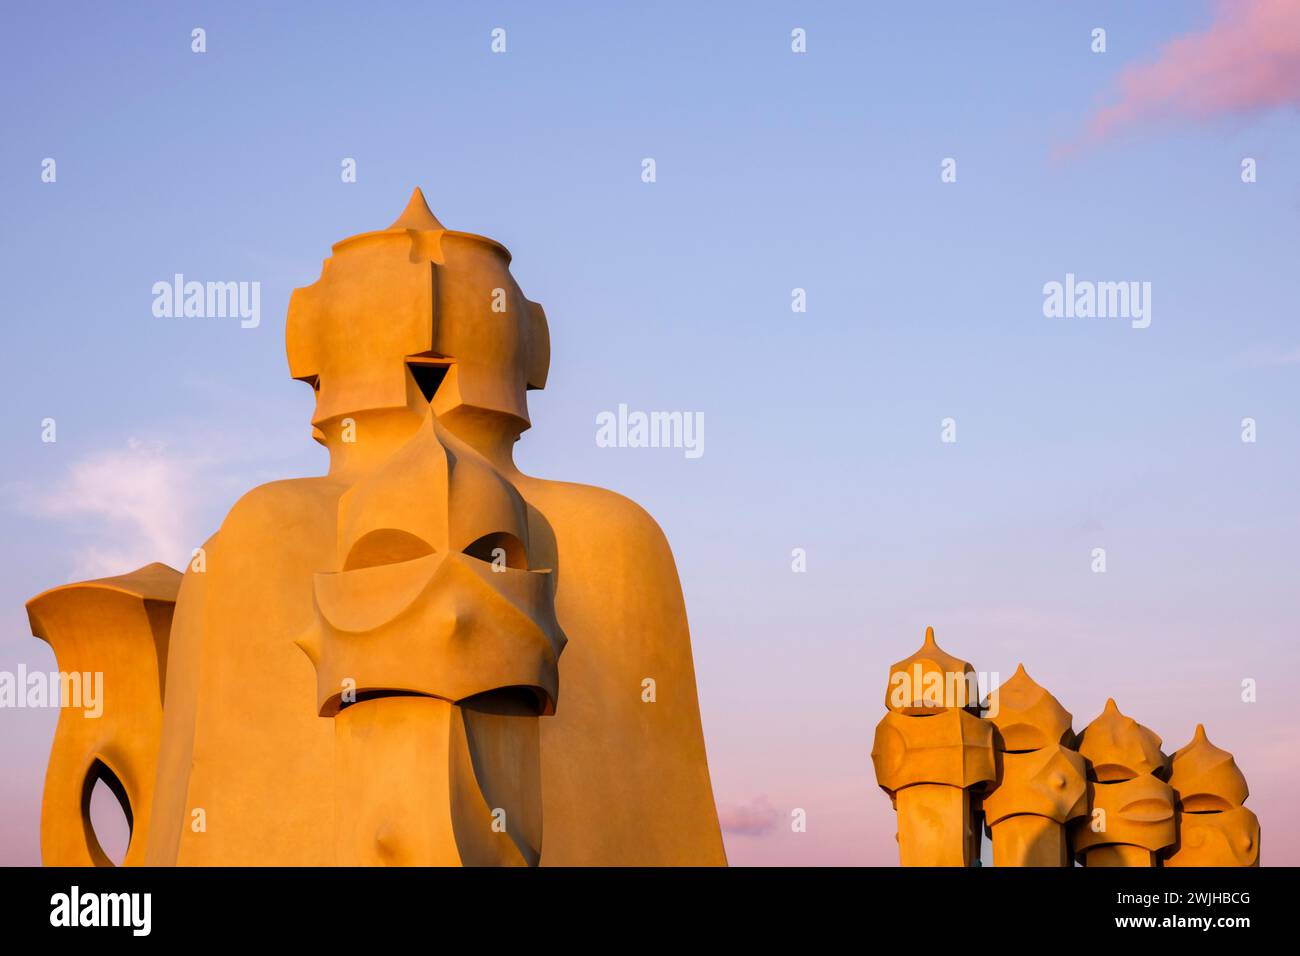 Casa Milà, La Pedrera, exterior details of rooftop chimneys and vents at sunset, modernista architecture by Antoni Gaudí, Barcelona, Spain Stock Photo